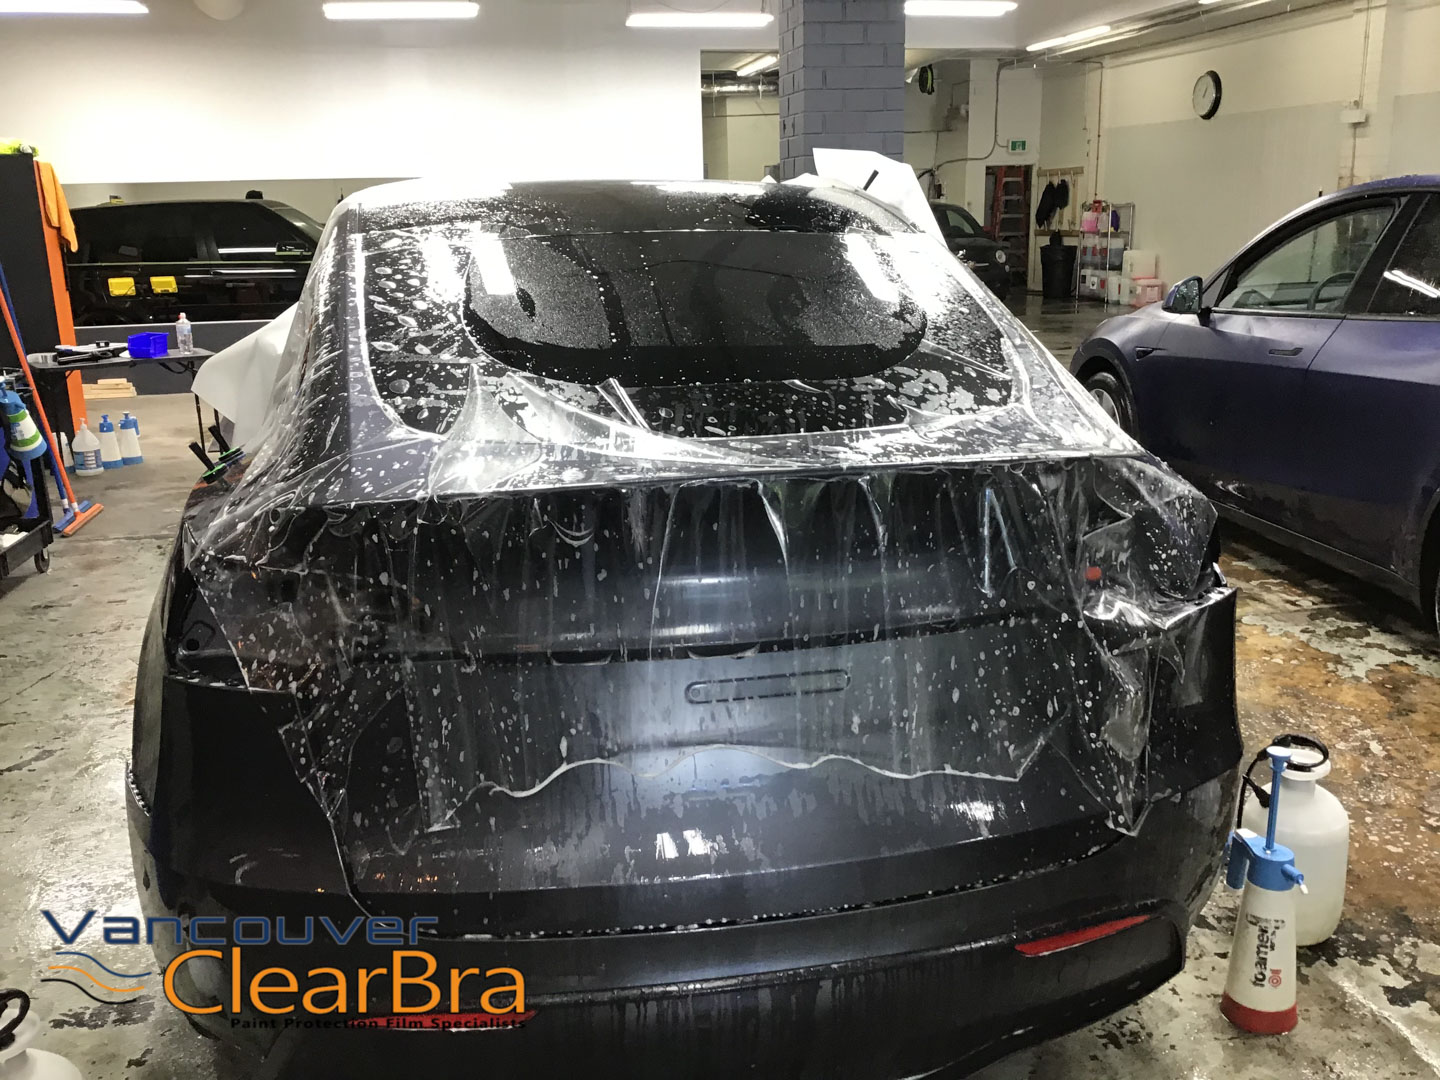 xpel-ultimate-xpel-stealth-clear-bra-paint-protection-film-Vancouver-ClearBra-2183.jpg